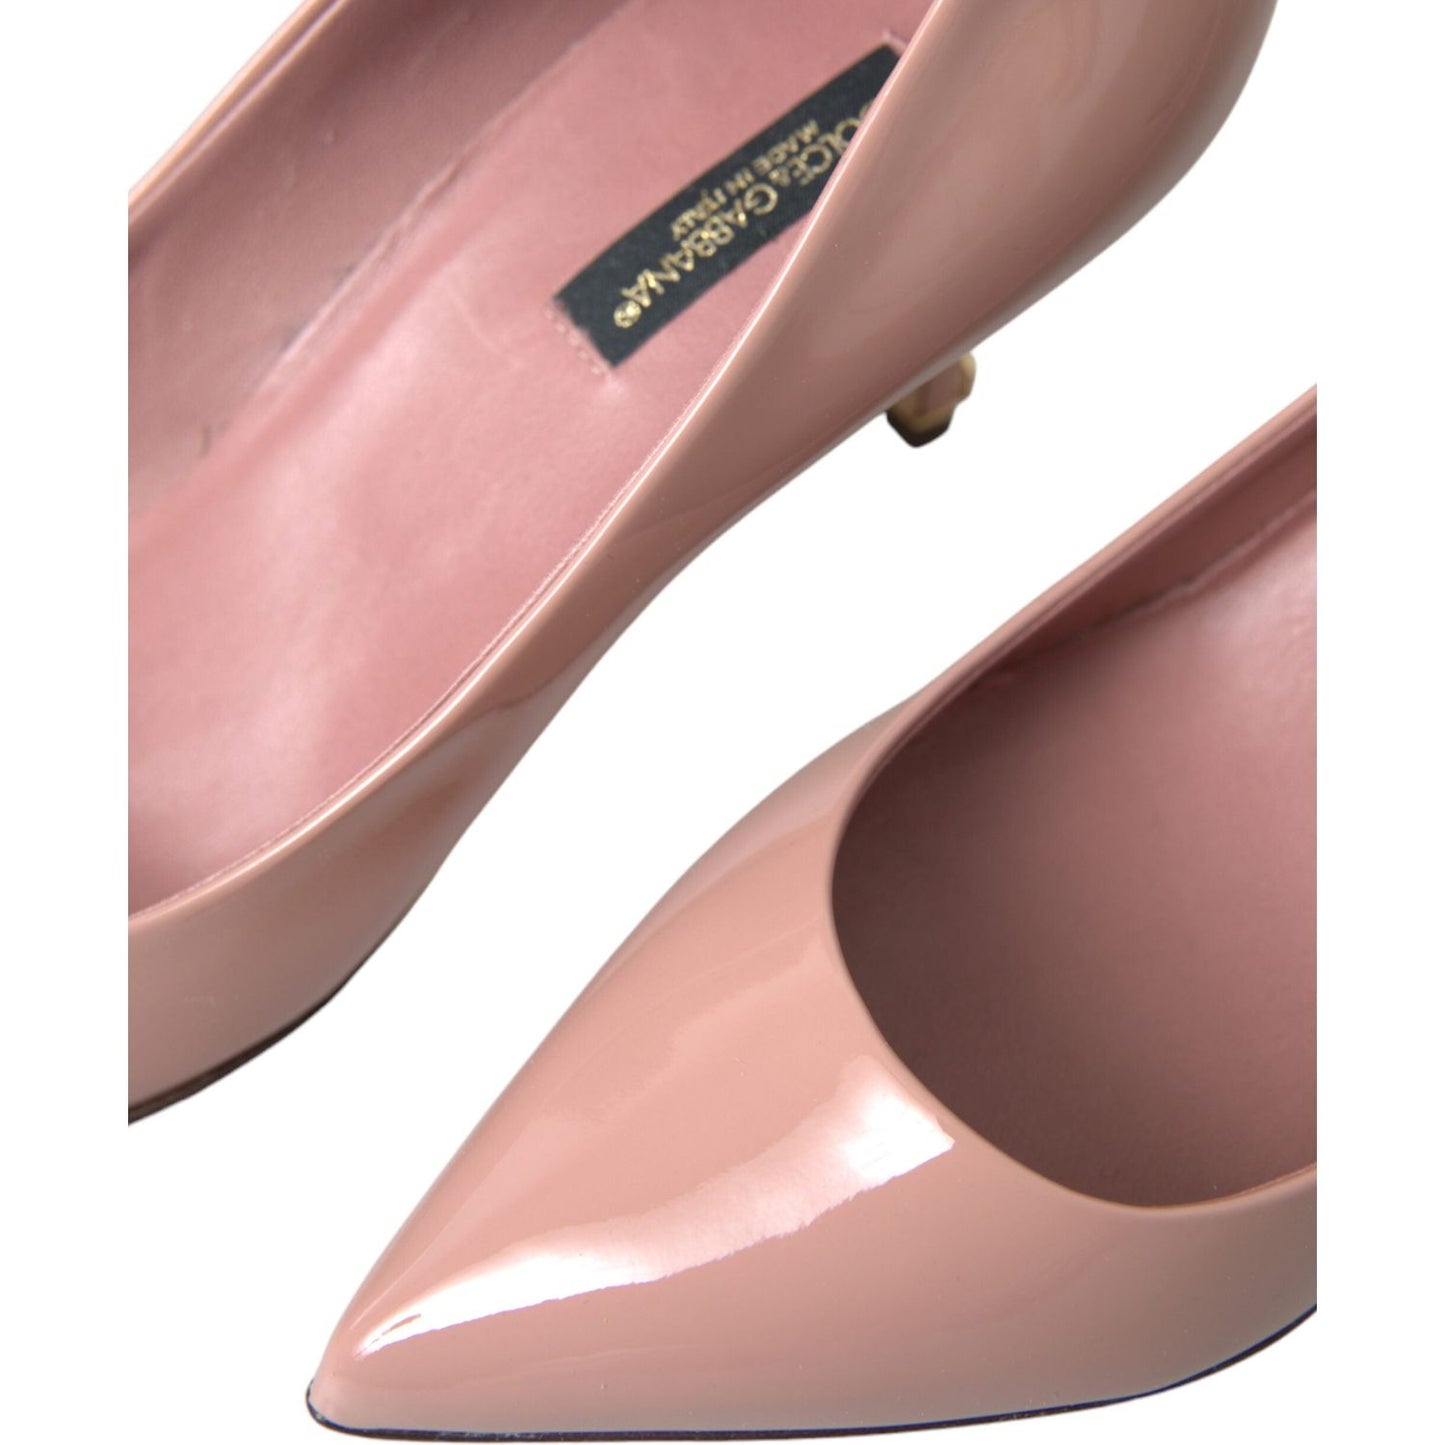 Dolce & Gabbana Pink Patent Stiletto Pumps - Elevate Your Glamour pink-patent-leather-pumps-heels-shoes 465A9872-bg-scaled-87a96b66-f4b.jpg